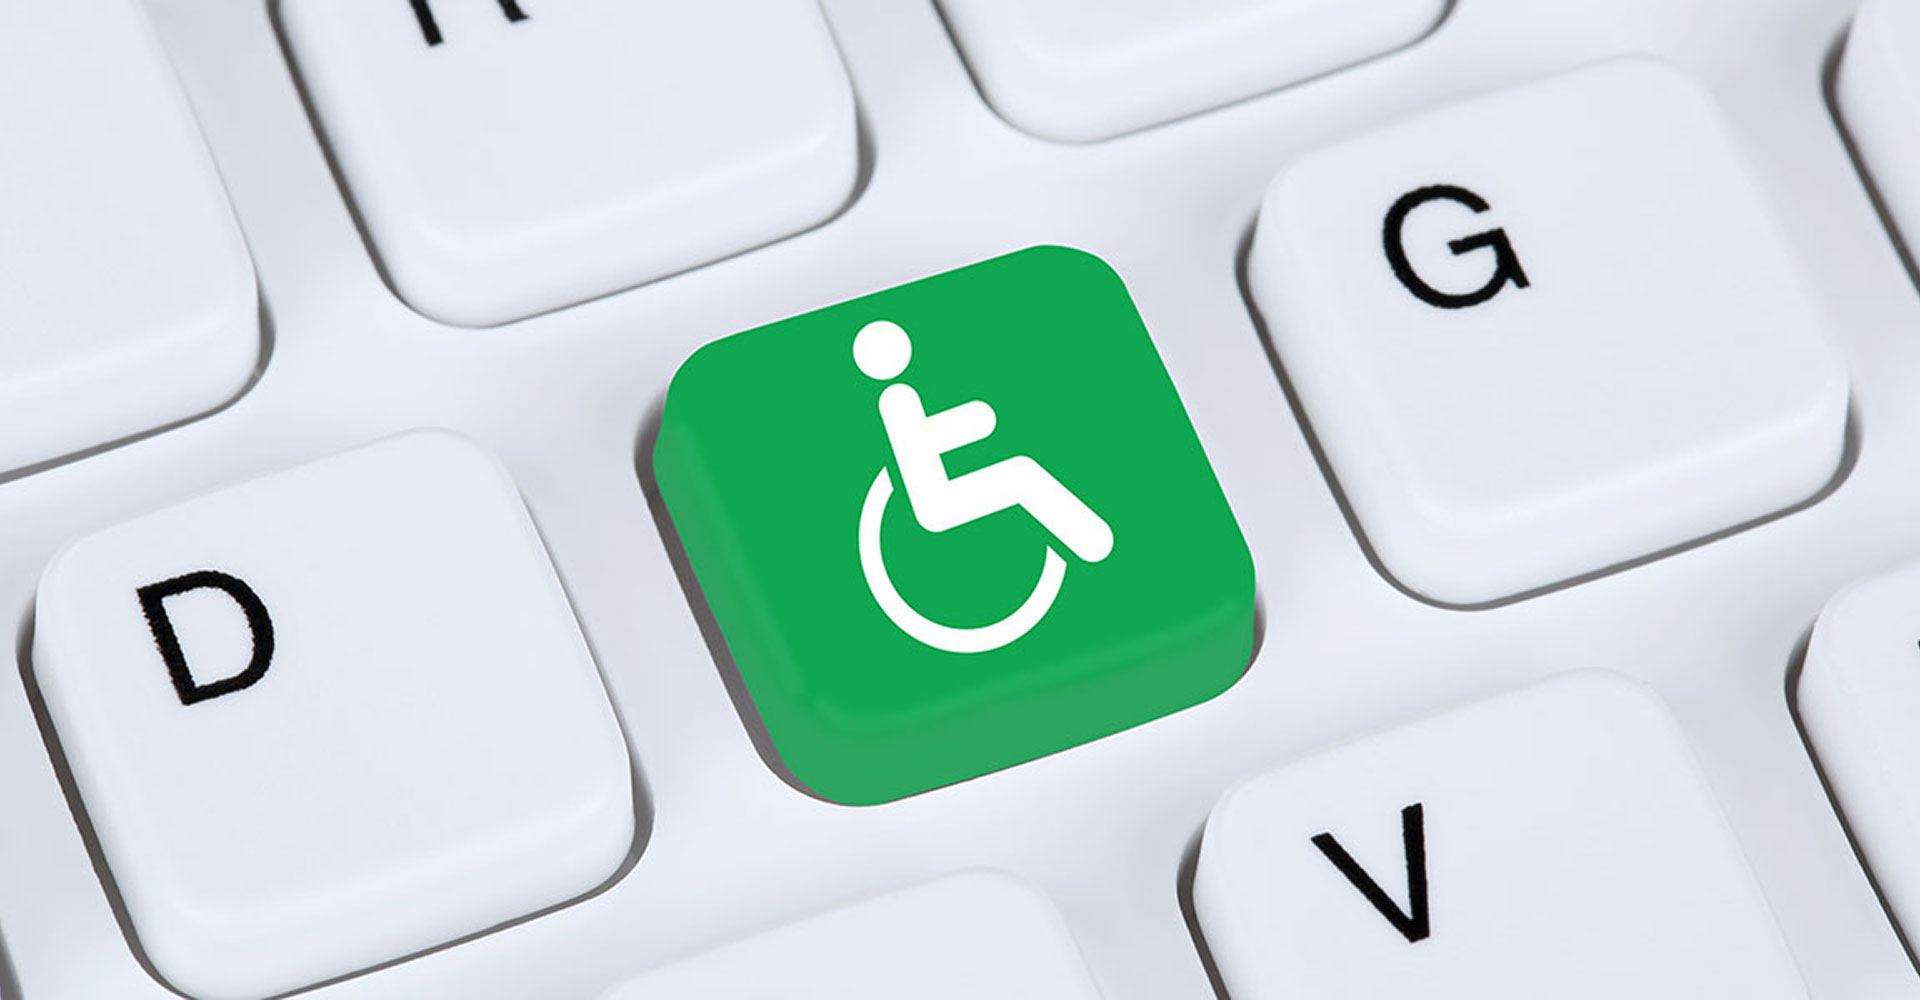 Phot of a close up of a keyboard featuring a bright green key with the handicap icon on it